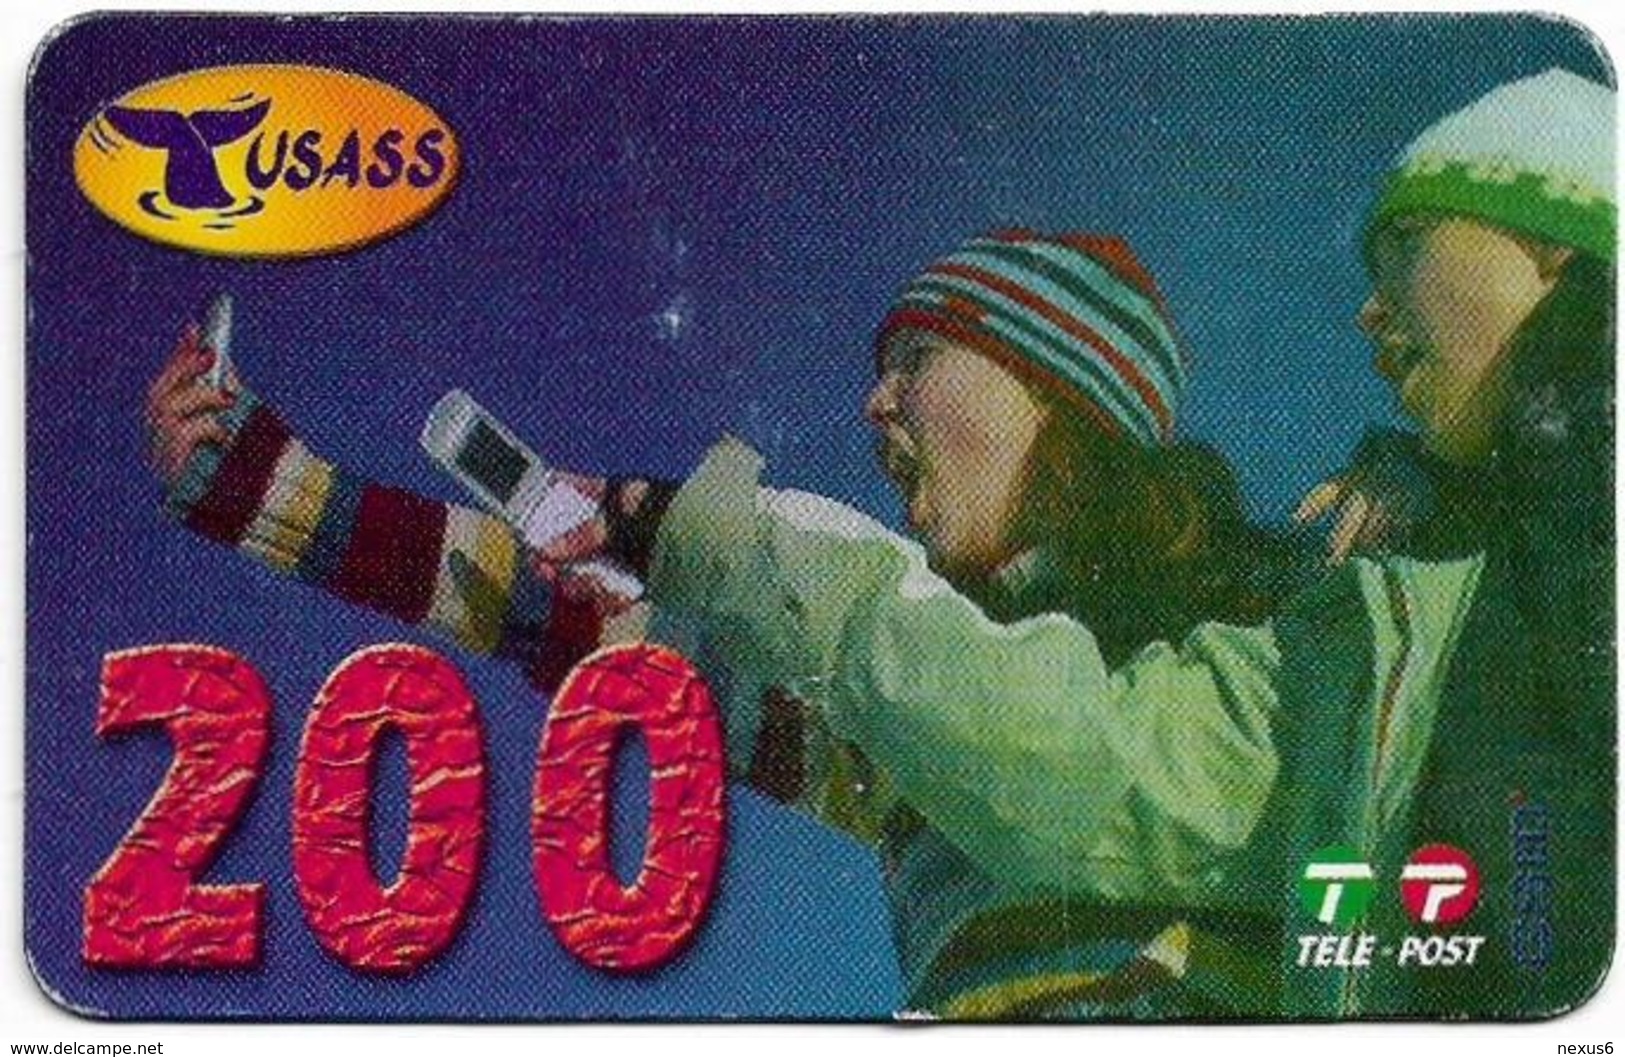 Greenland - Tusass - Two Girls With Mobile, GSM Refill, 200kr. Exp. 01.10.2006, Used - Groenland